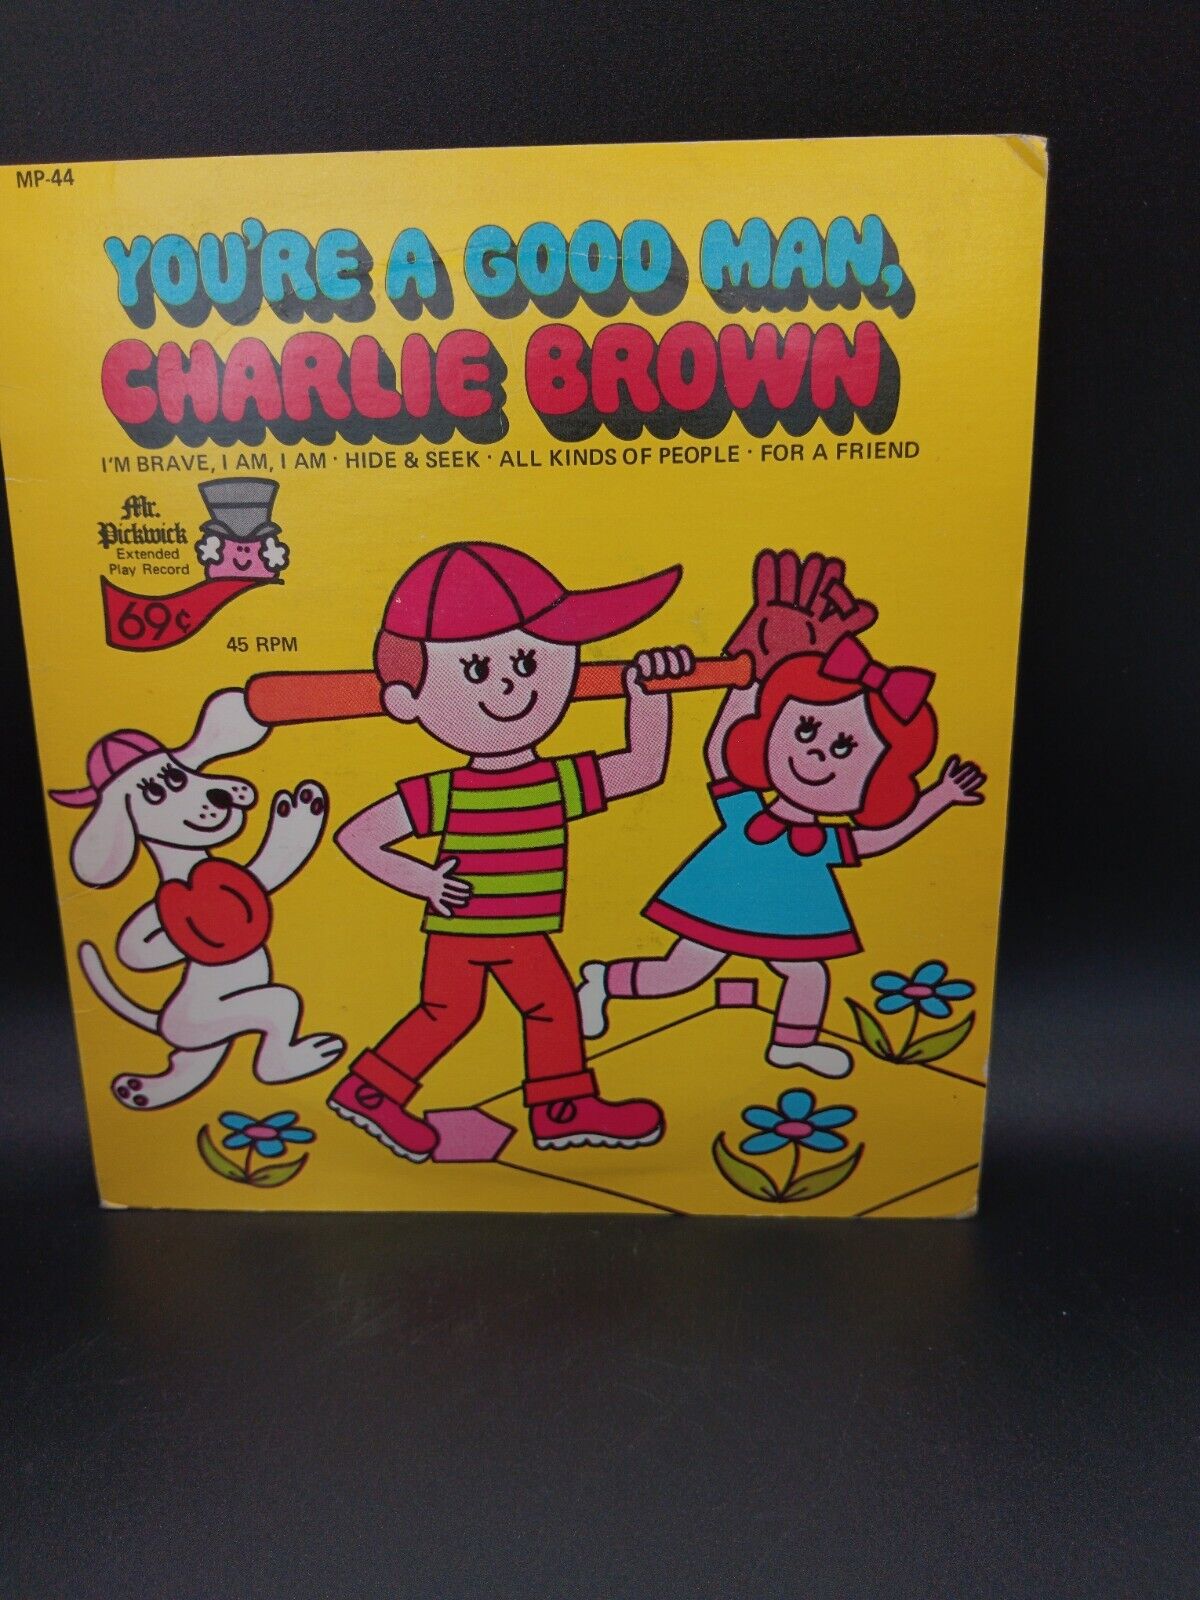 Vintage 1970's "You're a Good Man, Charlie Brown" - Mr. Pickwick -Near Mint